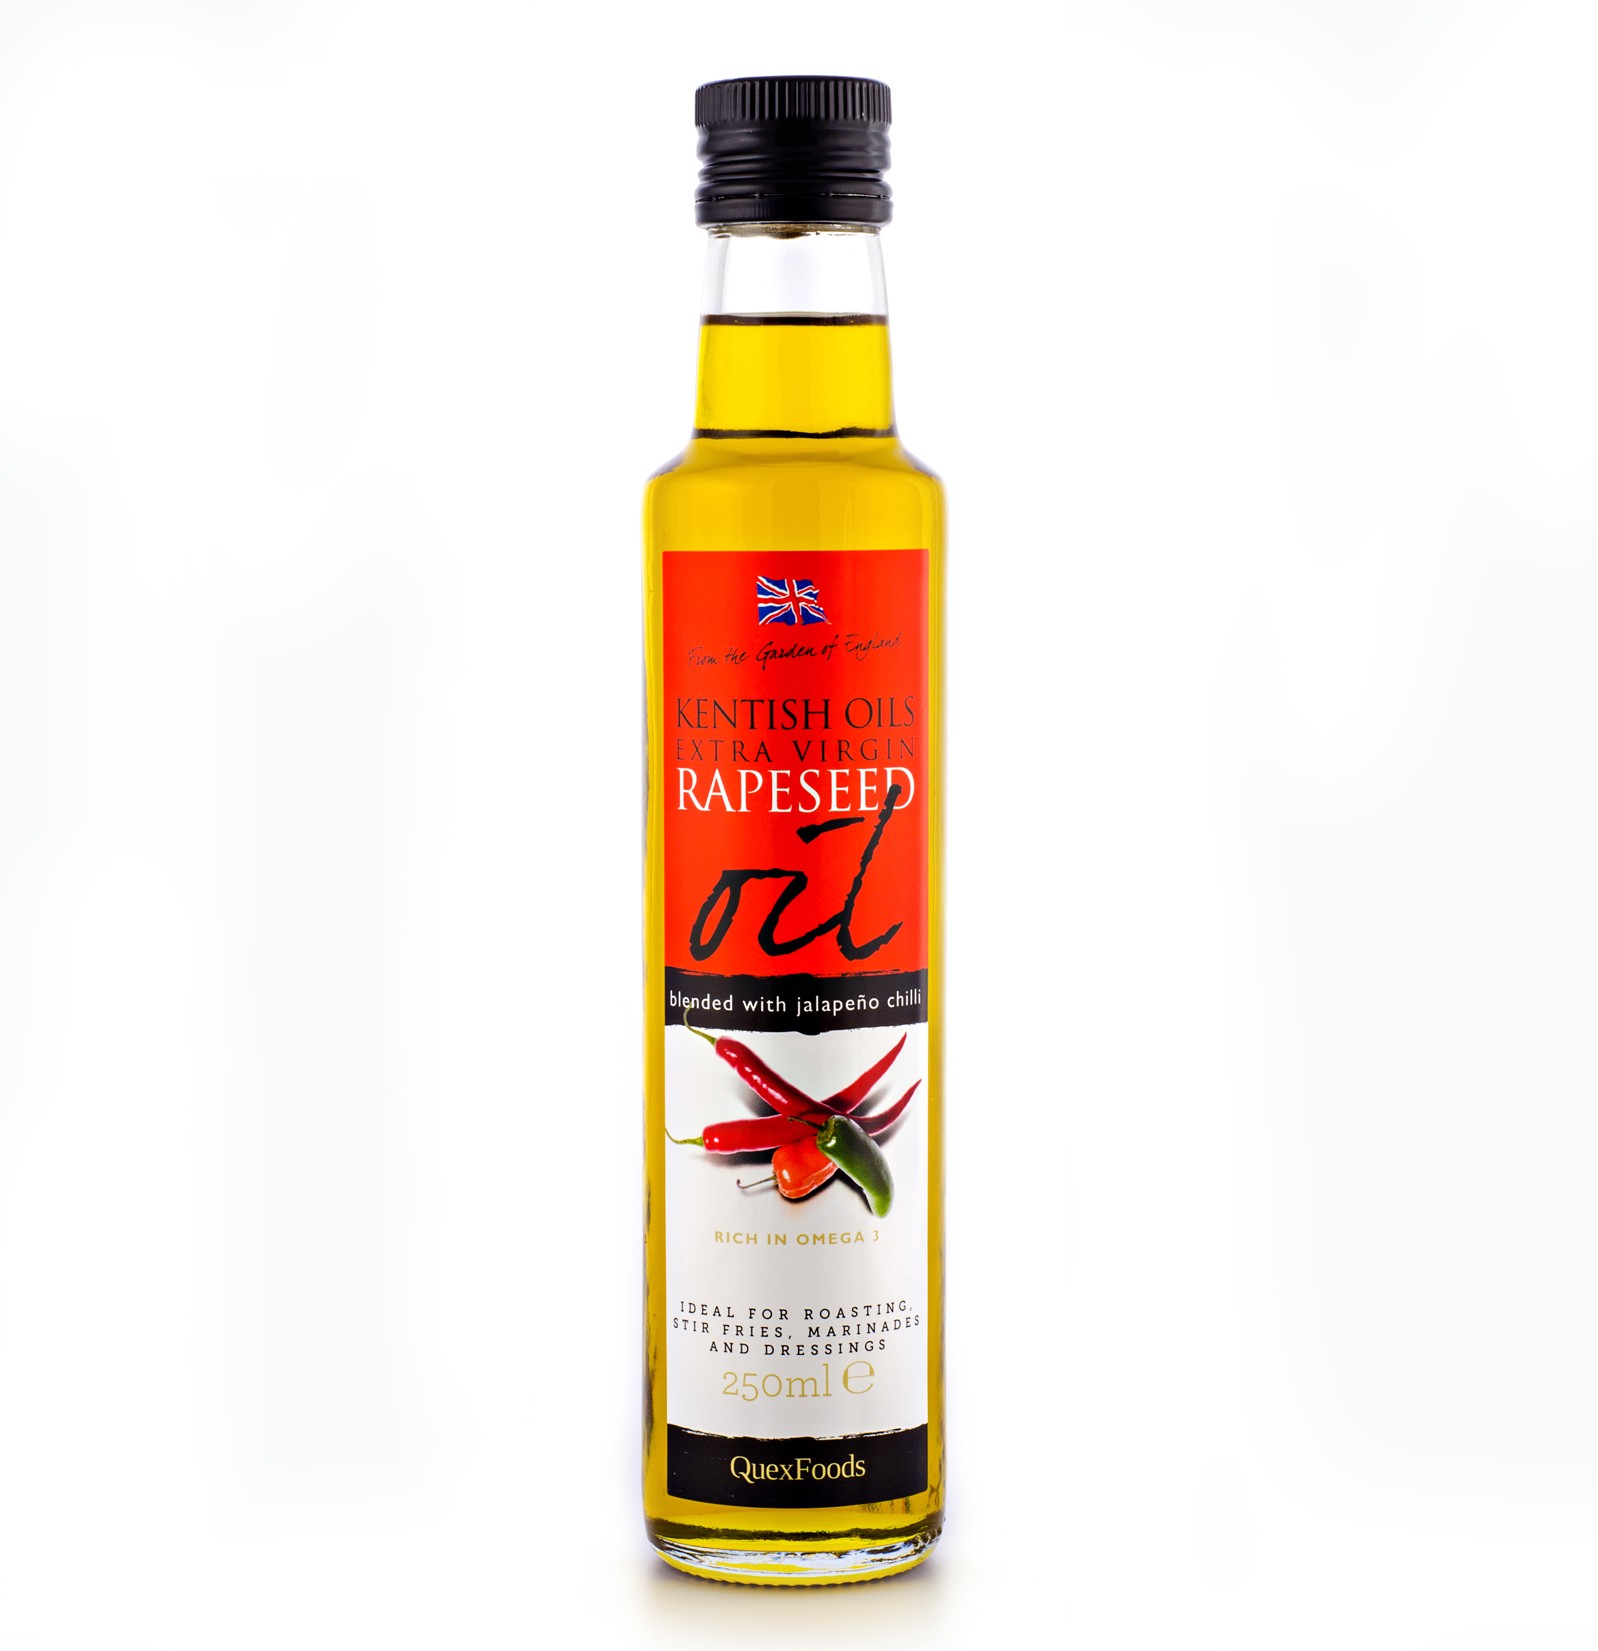 Jalapeno Chilli Infused Rapeseed Oil